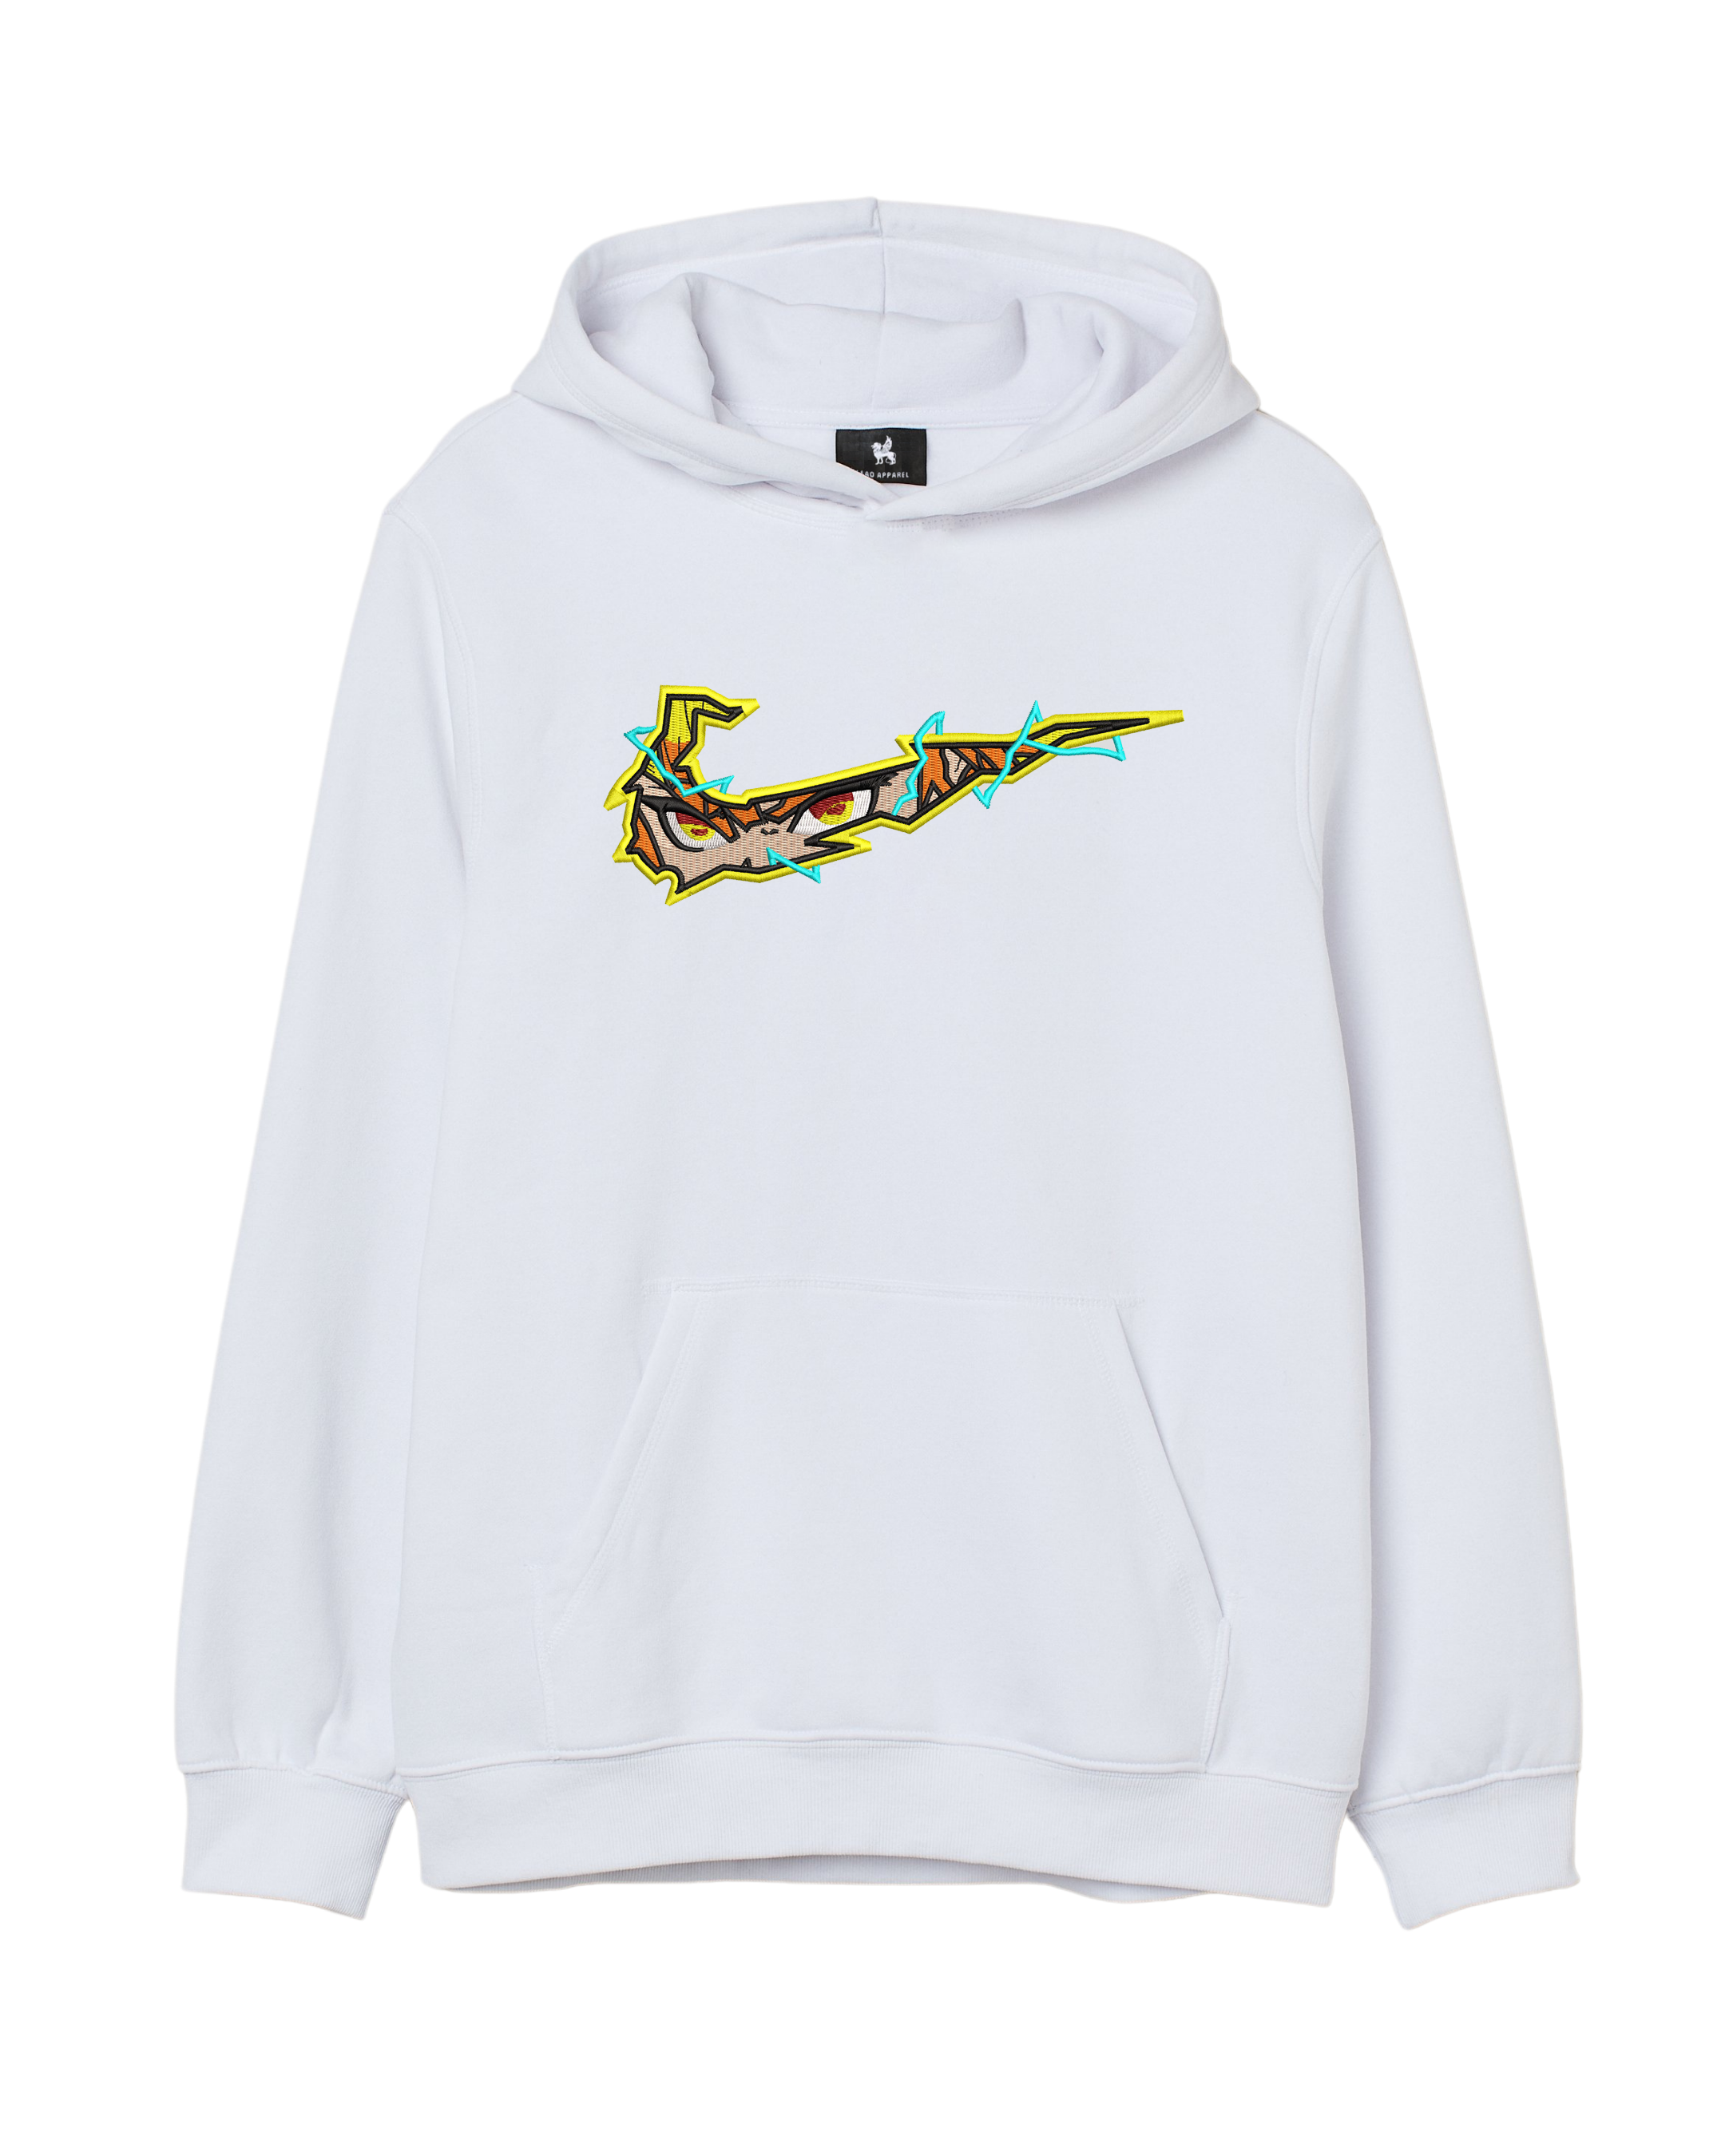 Nike Embroidered Sweatshirt Matching Luffy Gift For One Piece Anime Lover -  Bugaloo Boutique